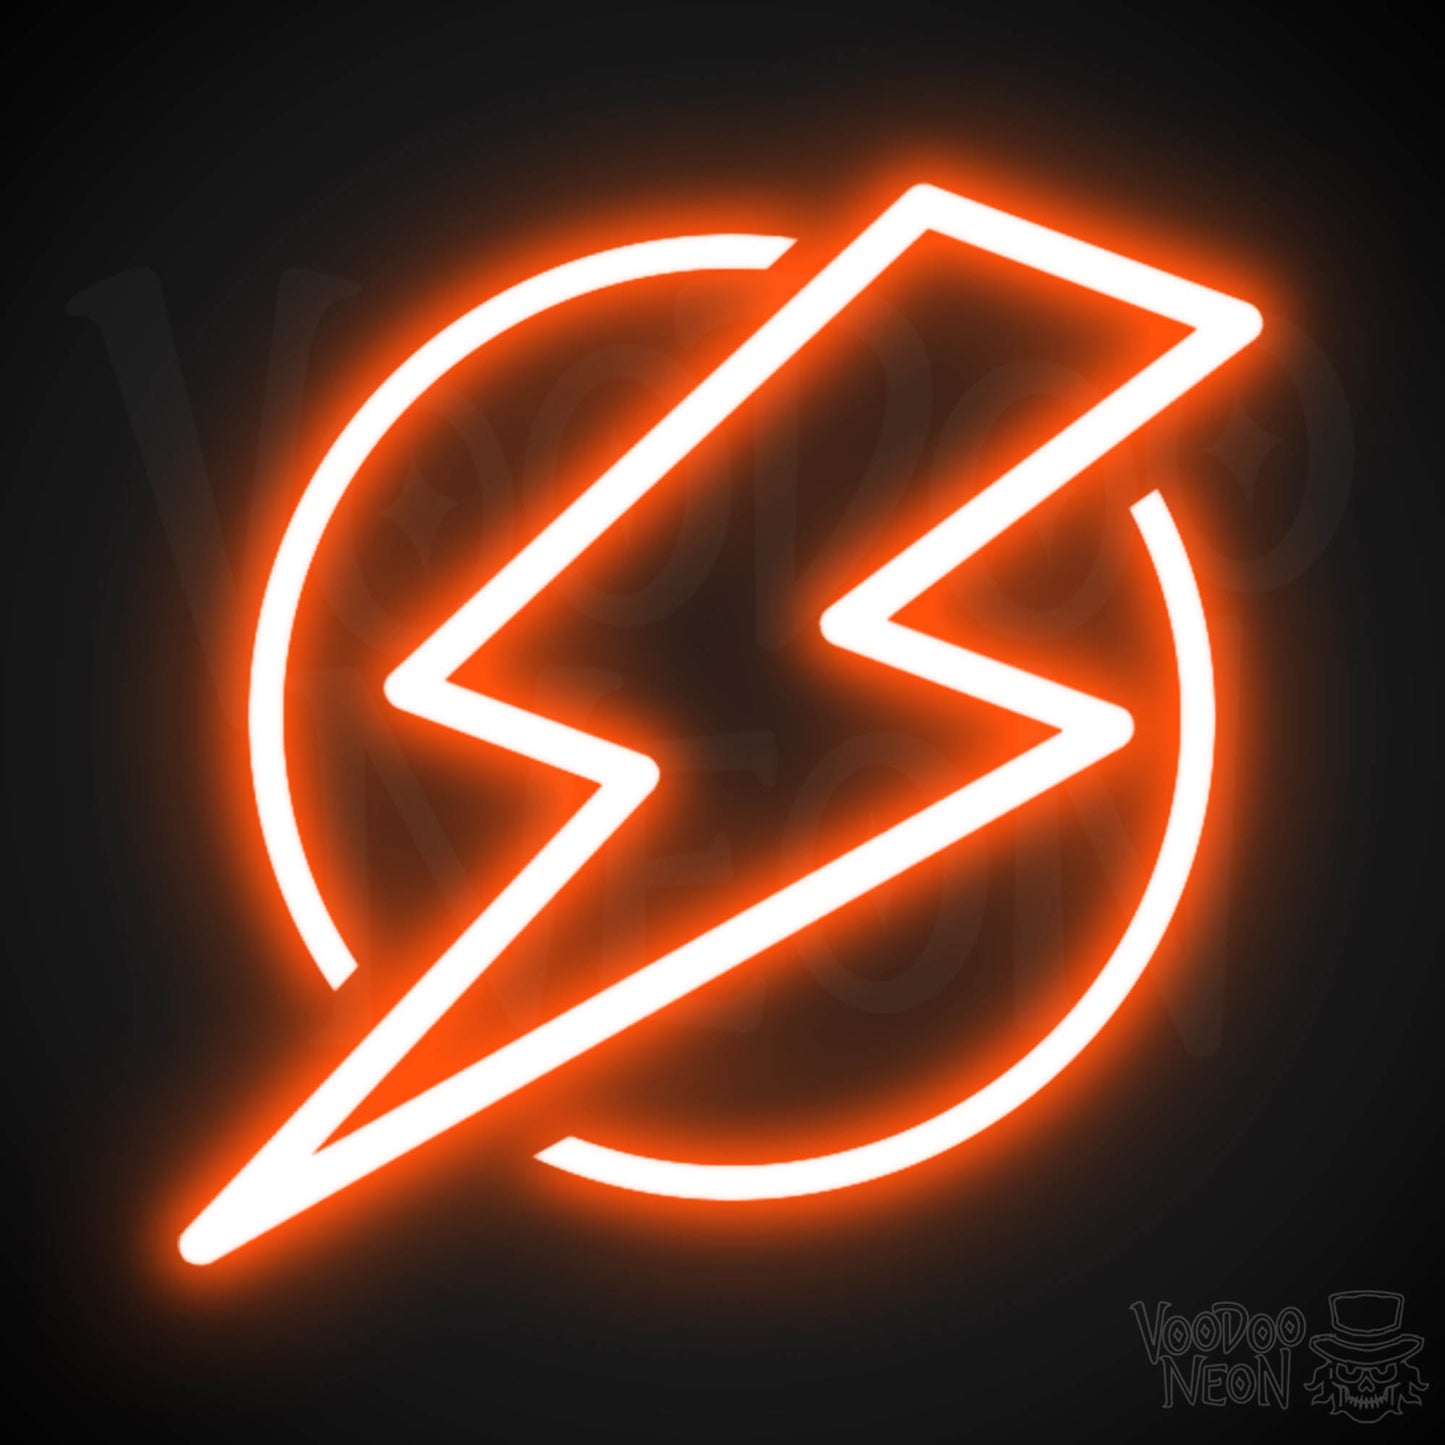 Electric Neon Wall Art - Neon Electric Sign - Wall Art - Color Orange